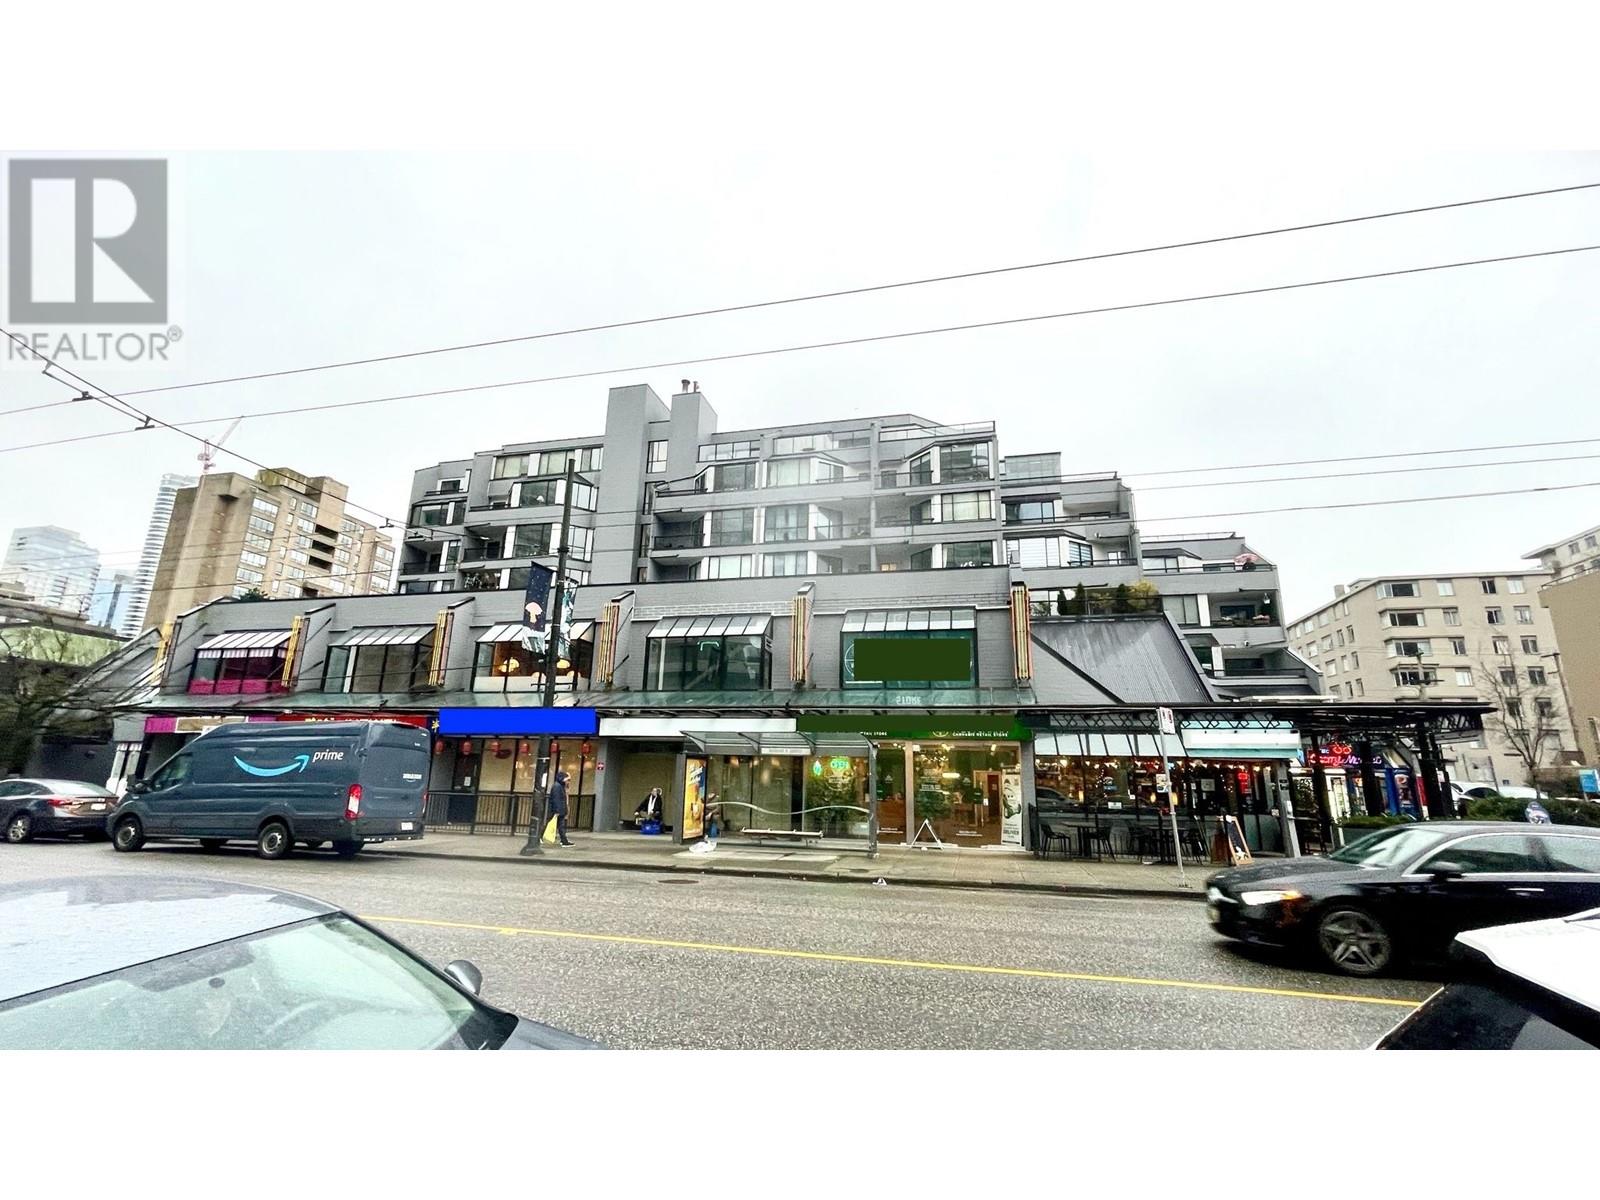 For sale: 1284 ROBSON STREET, Vancouver, British Columbia V6E1C1 - C8058060